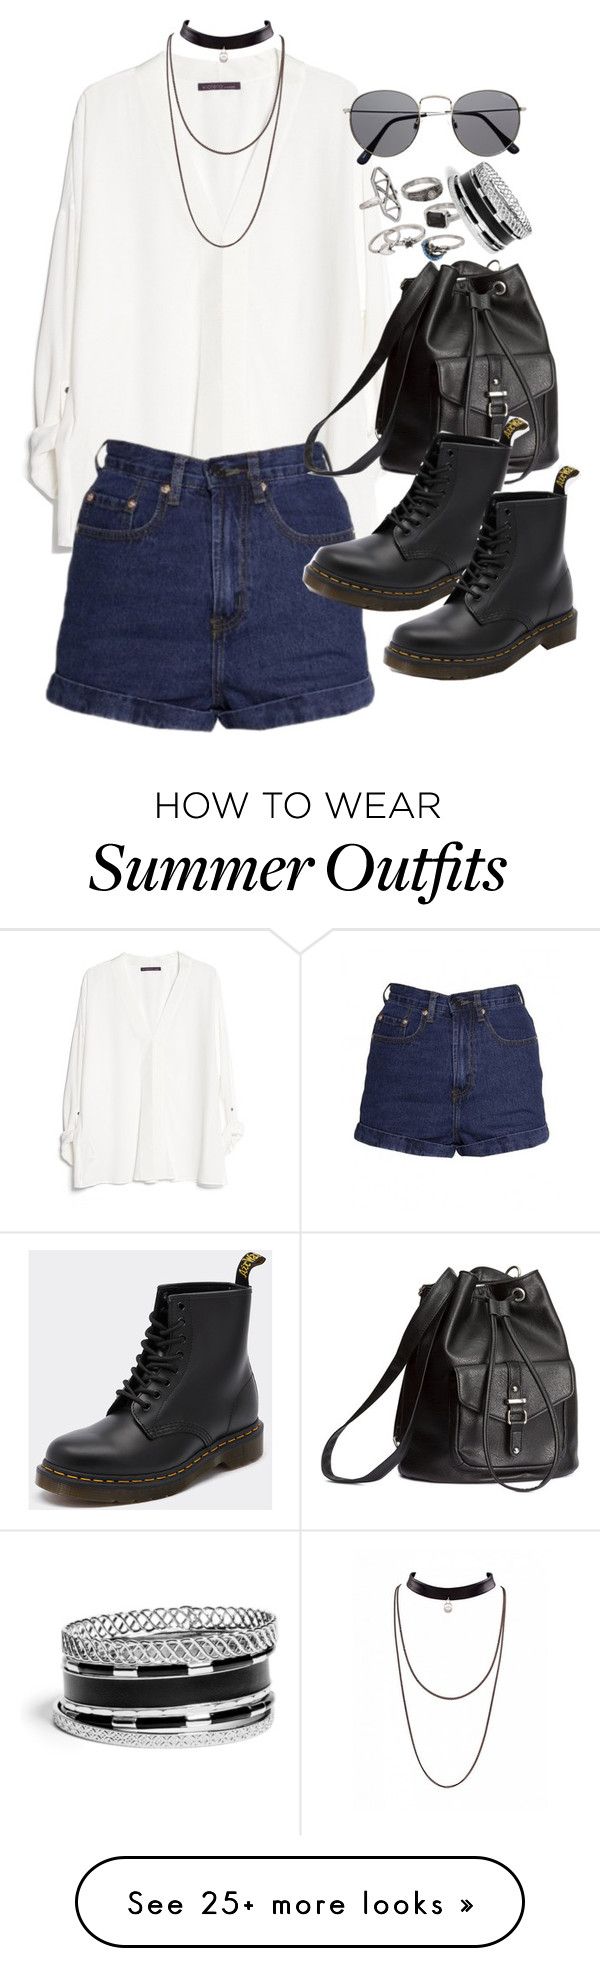 "Requested outfit" by ferned on Polyvore featuring MANGO, H&M, Dr....